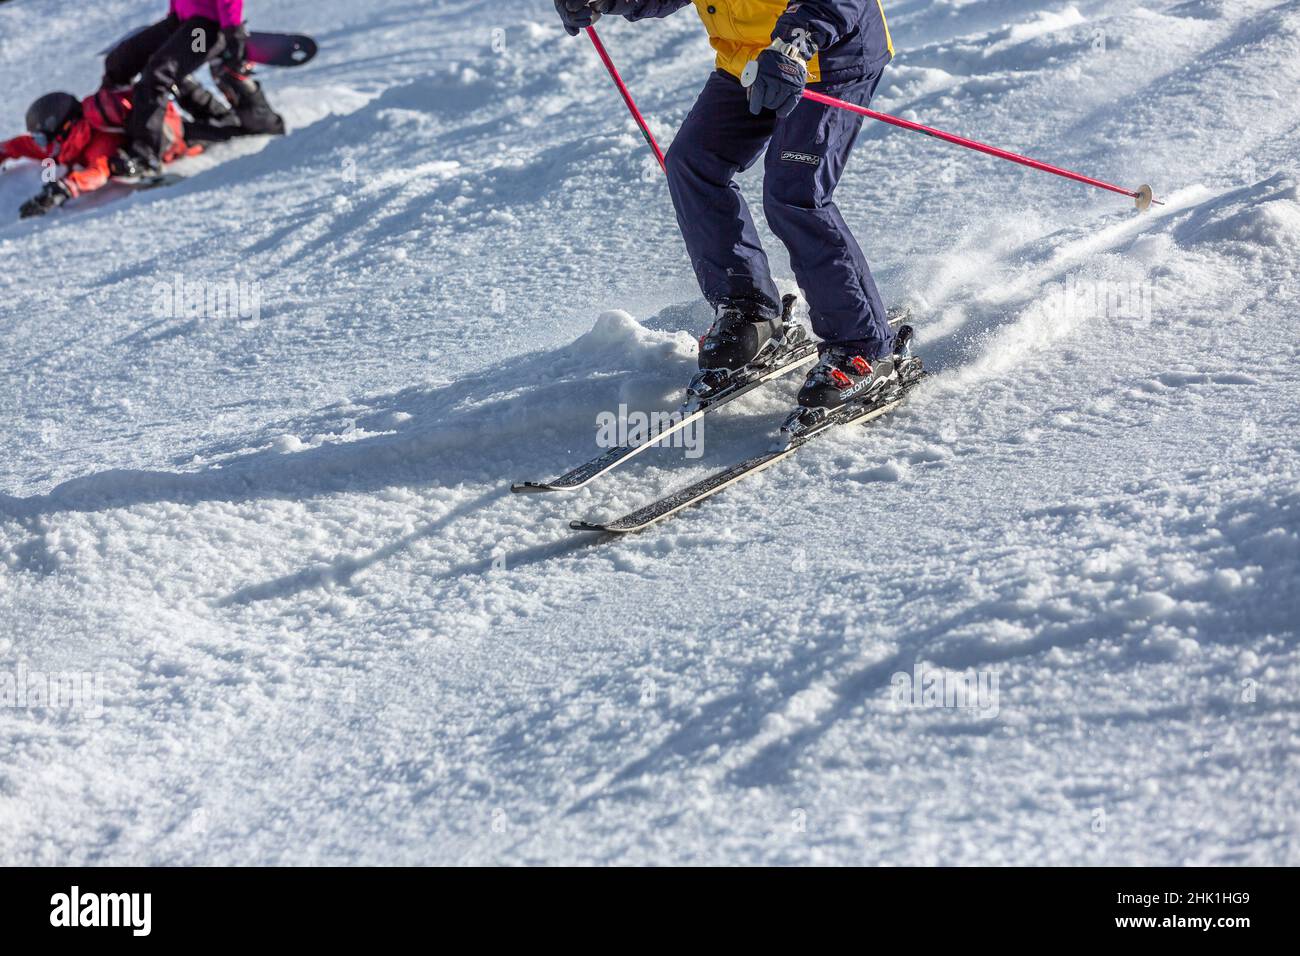 skiers next to fallen snowboarder on the slope Stock Photo